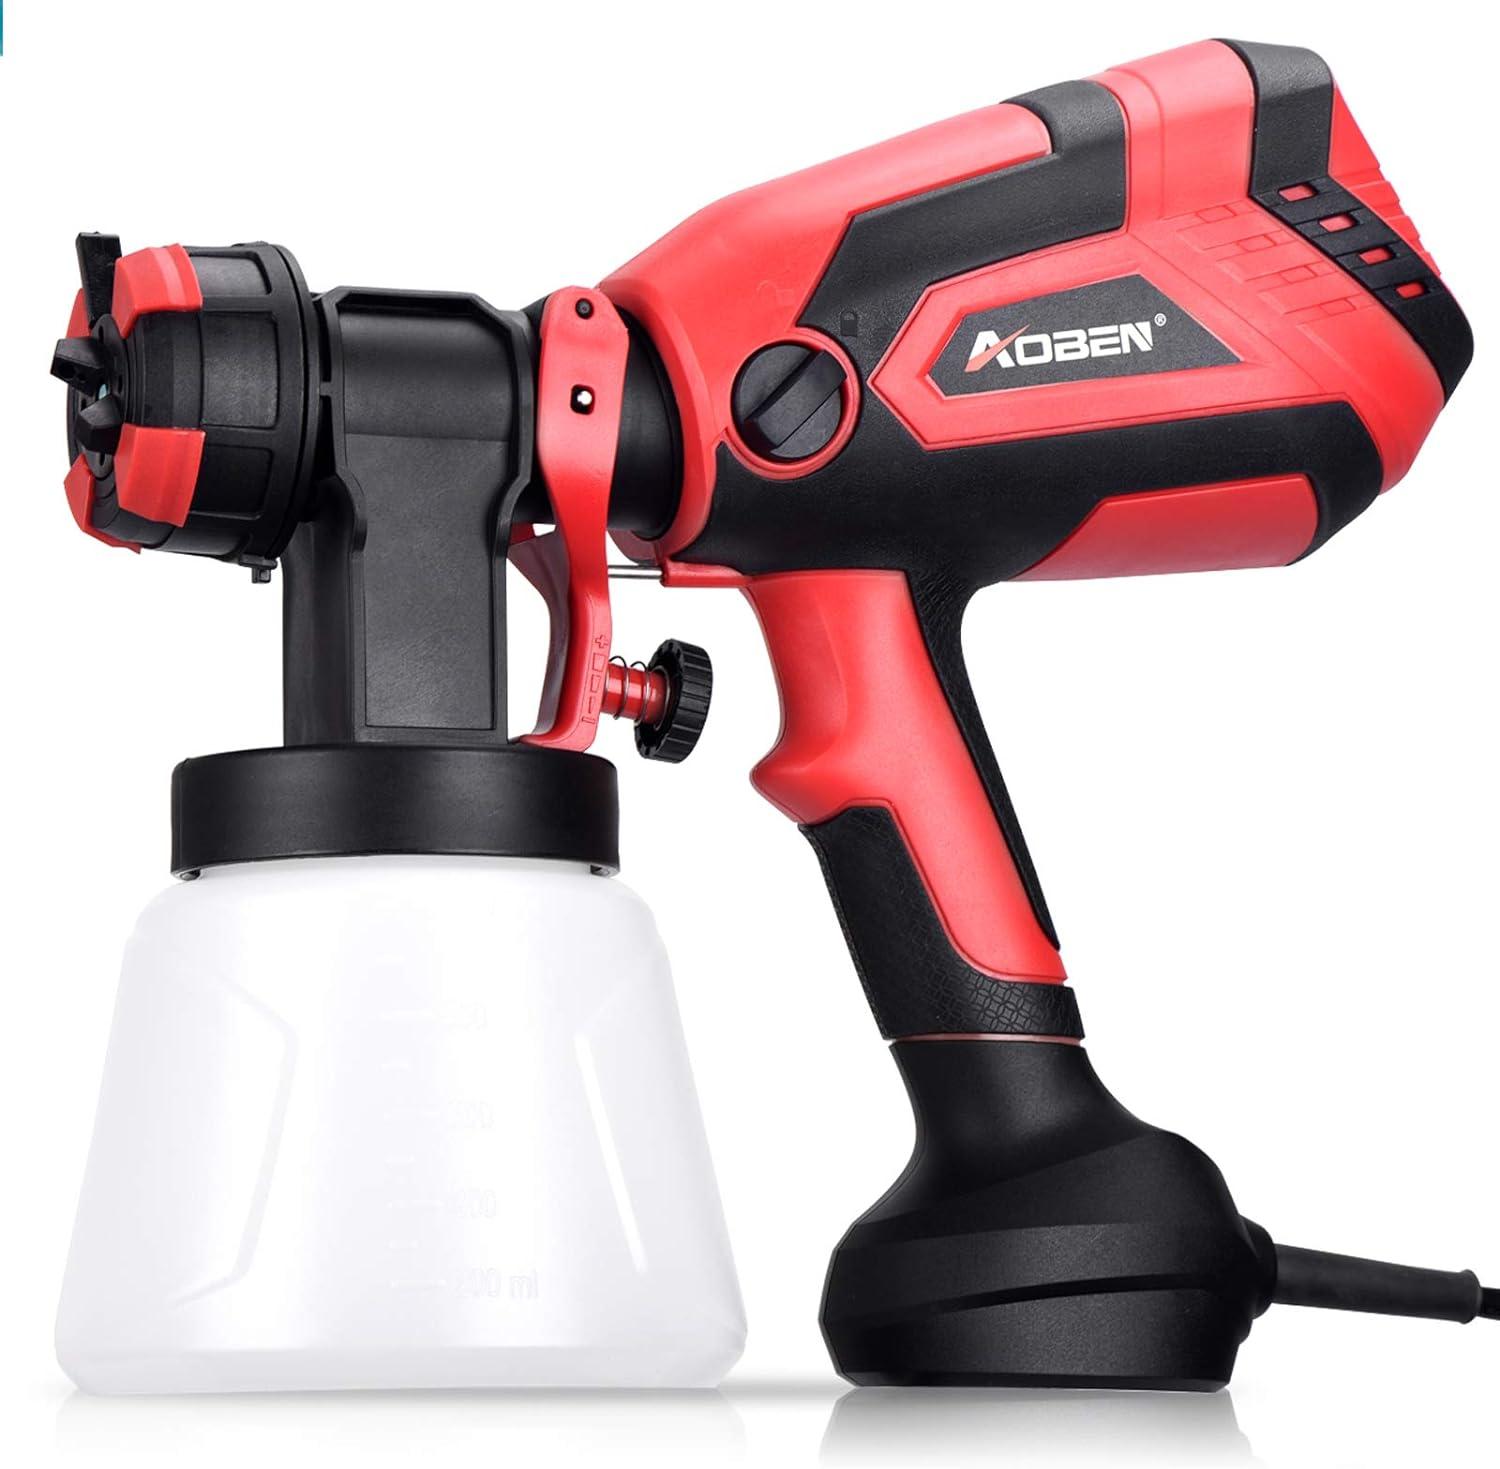 Hvlp 750W Electric Paint Spray Gun for $19.99 Shipped